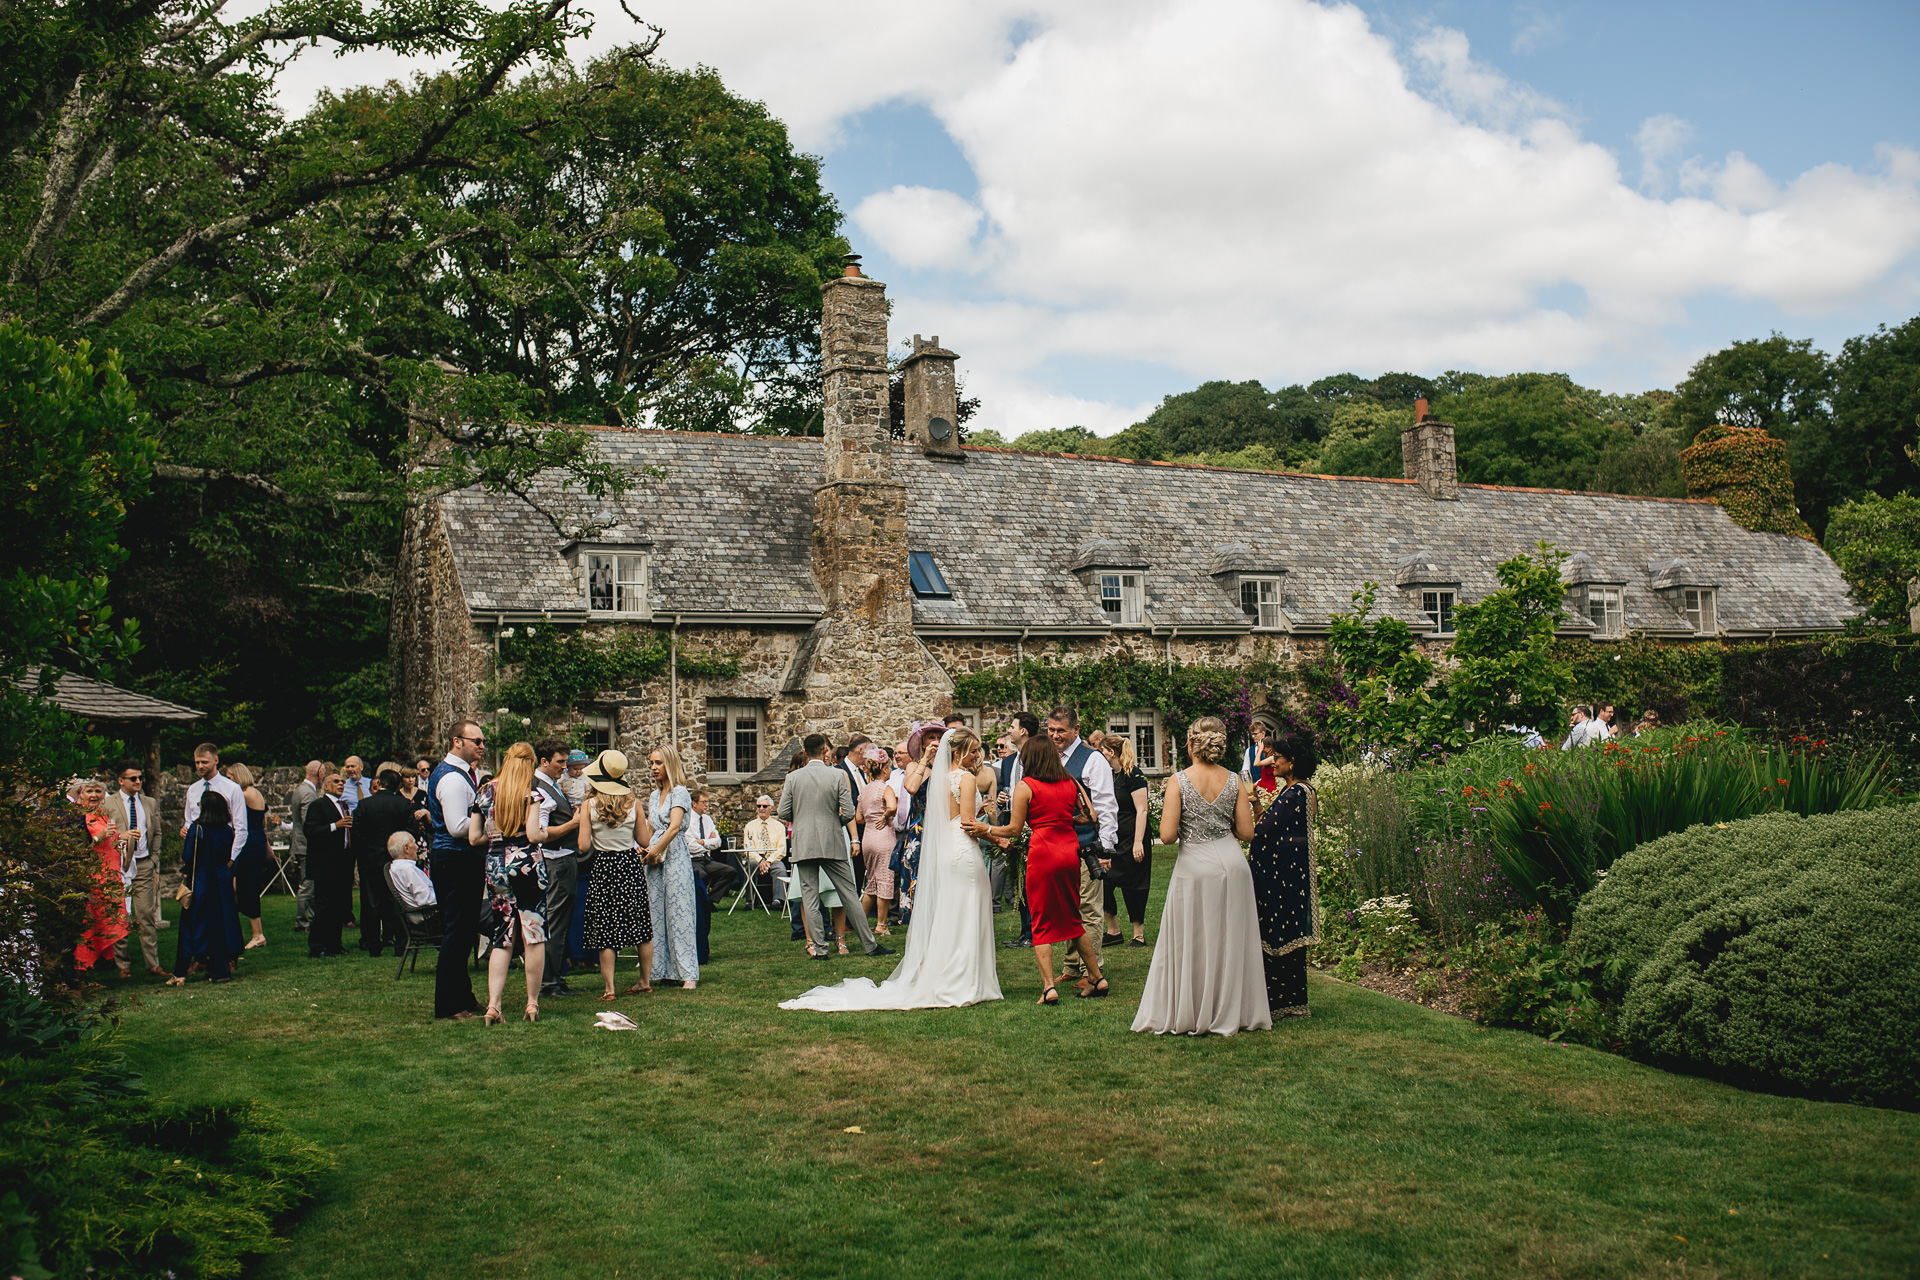 Wedding guests during drinks reception in gardens at the Great Barn